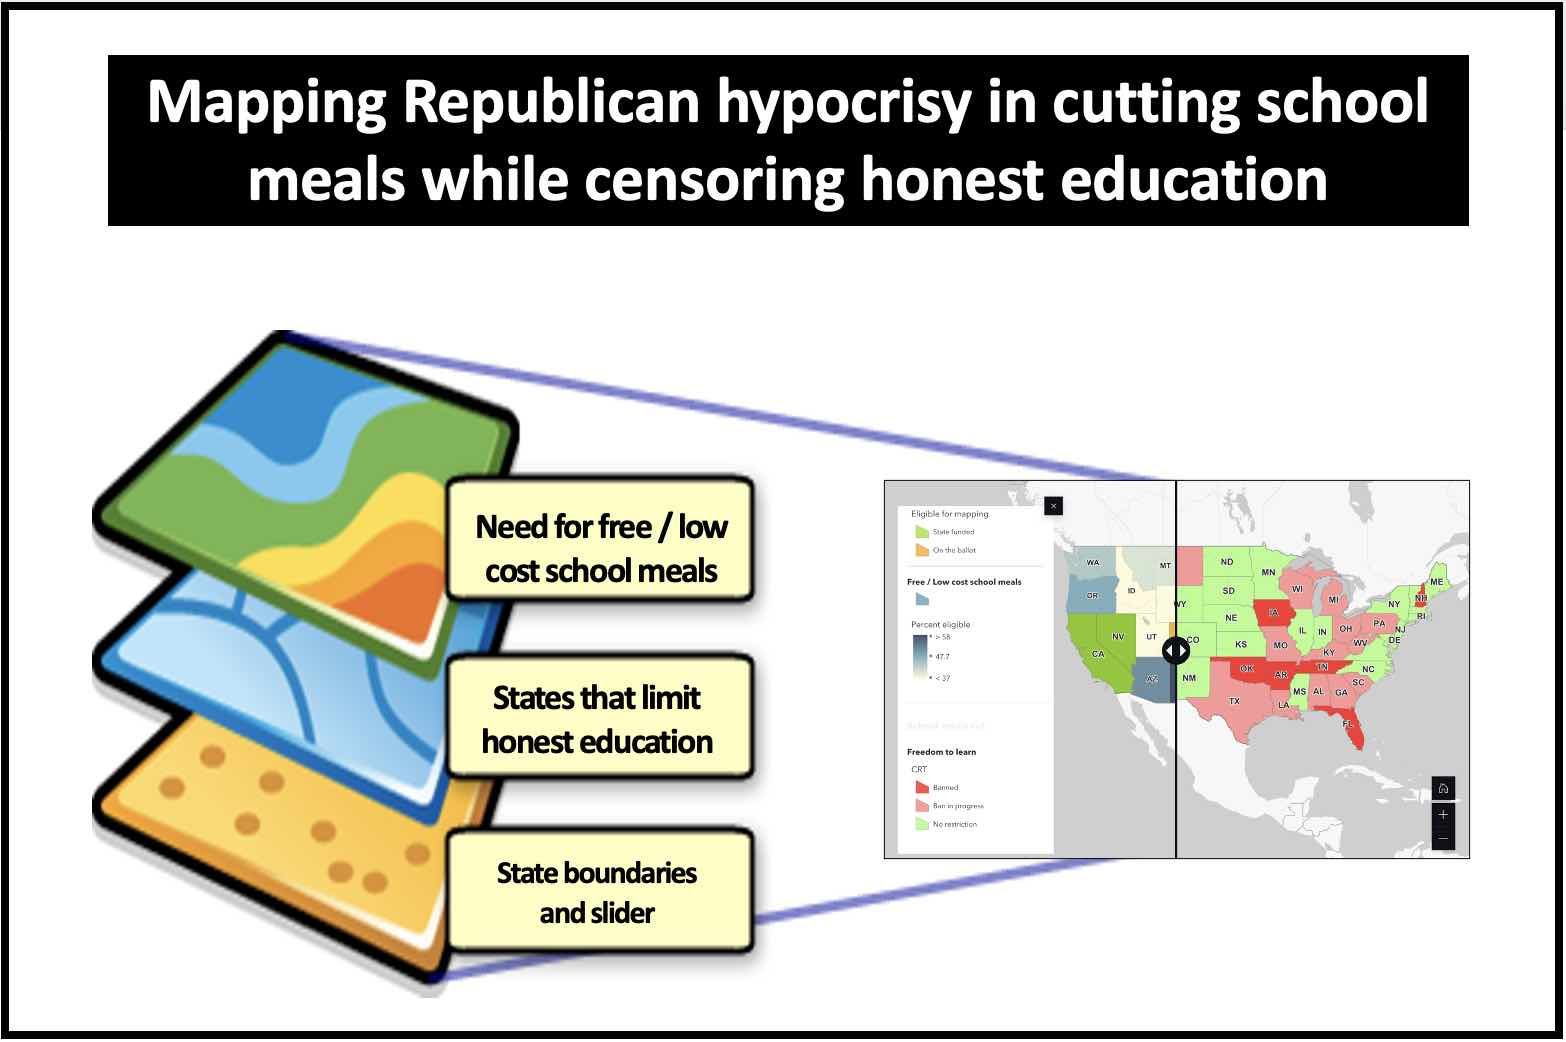 Mapping Republican hypocrisy in cutting funding for free and low cost meals while also censoring honest education.